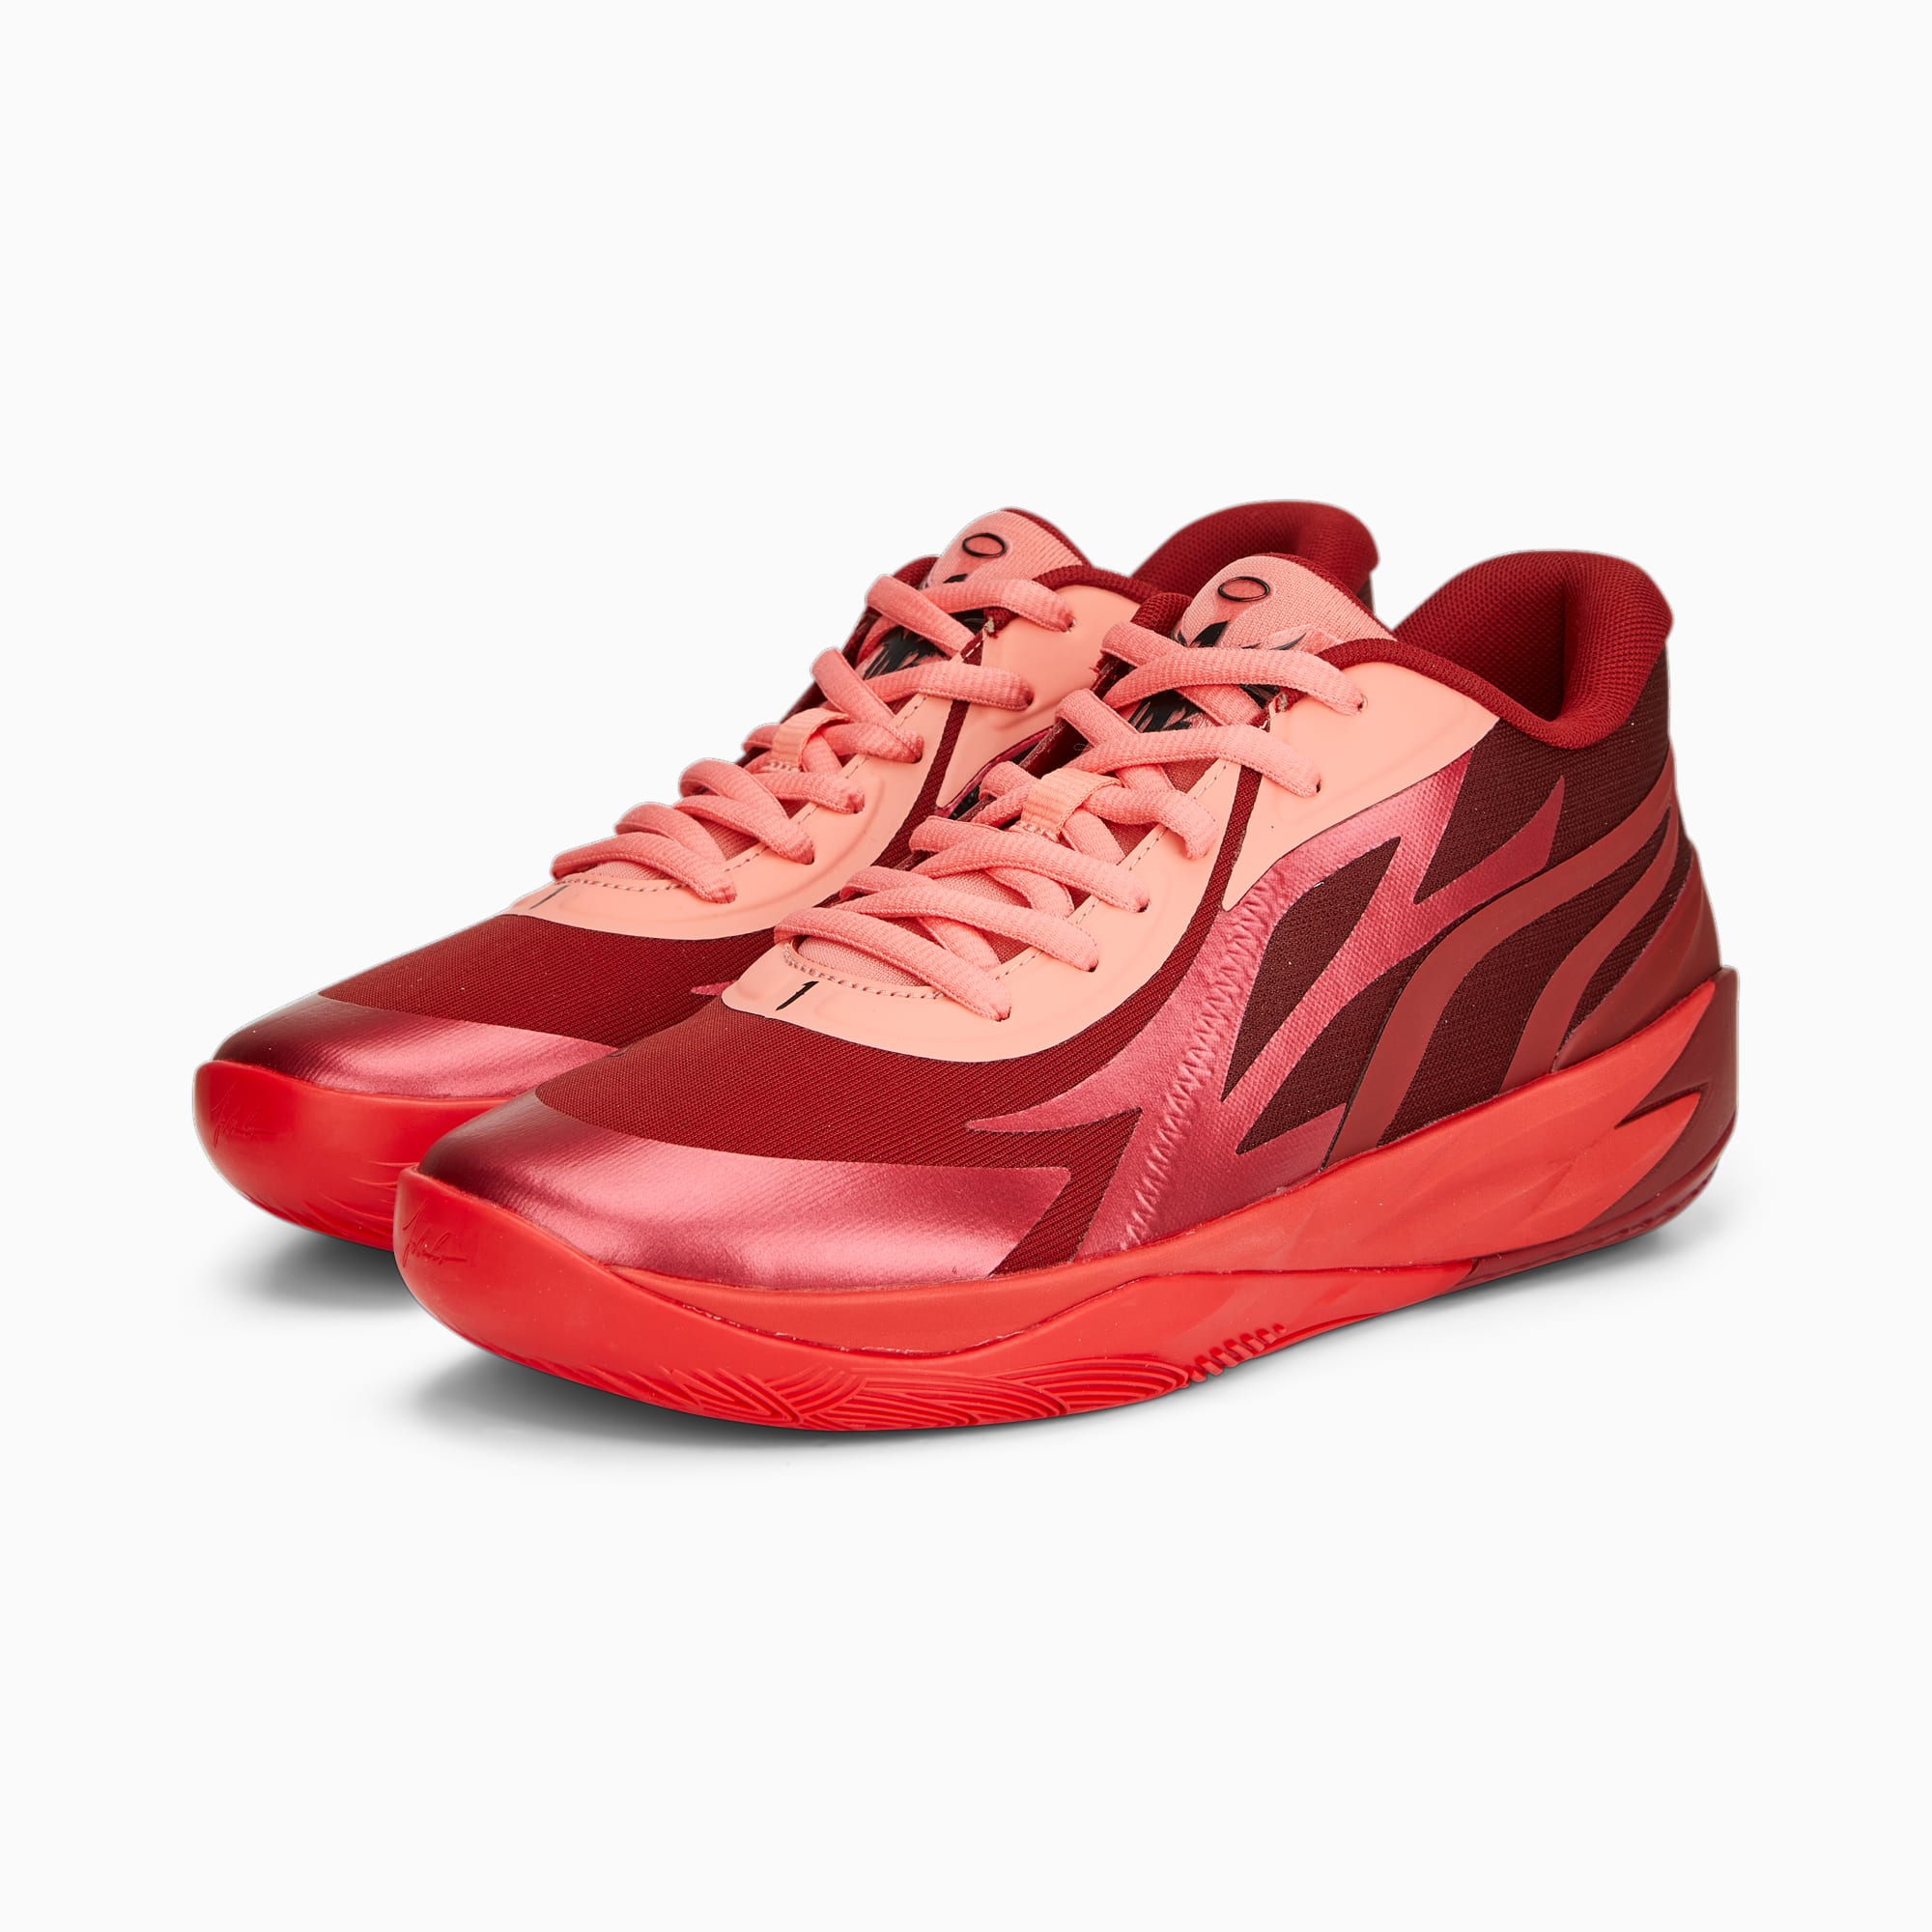 Men's PUMA Mb.02 Lo Basketball Shoe Sneakers, Intense Red/For All Time Red